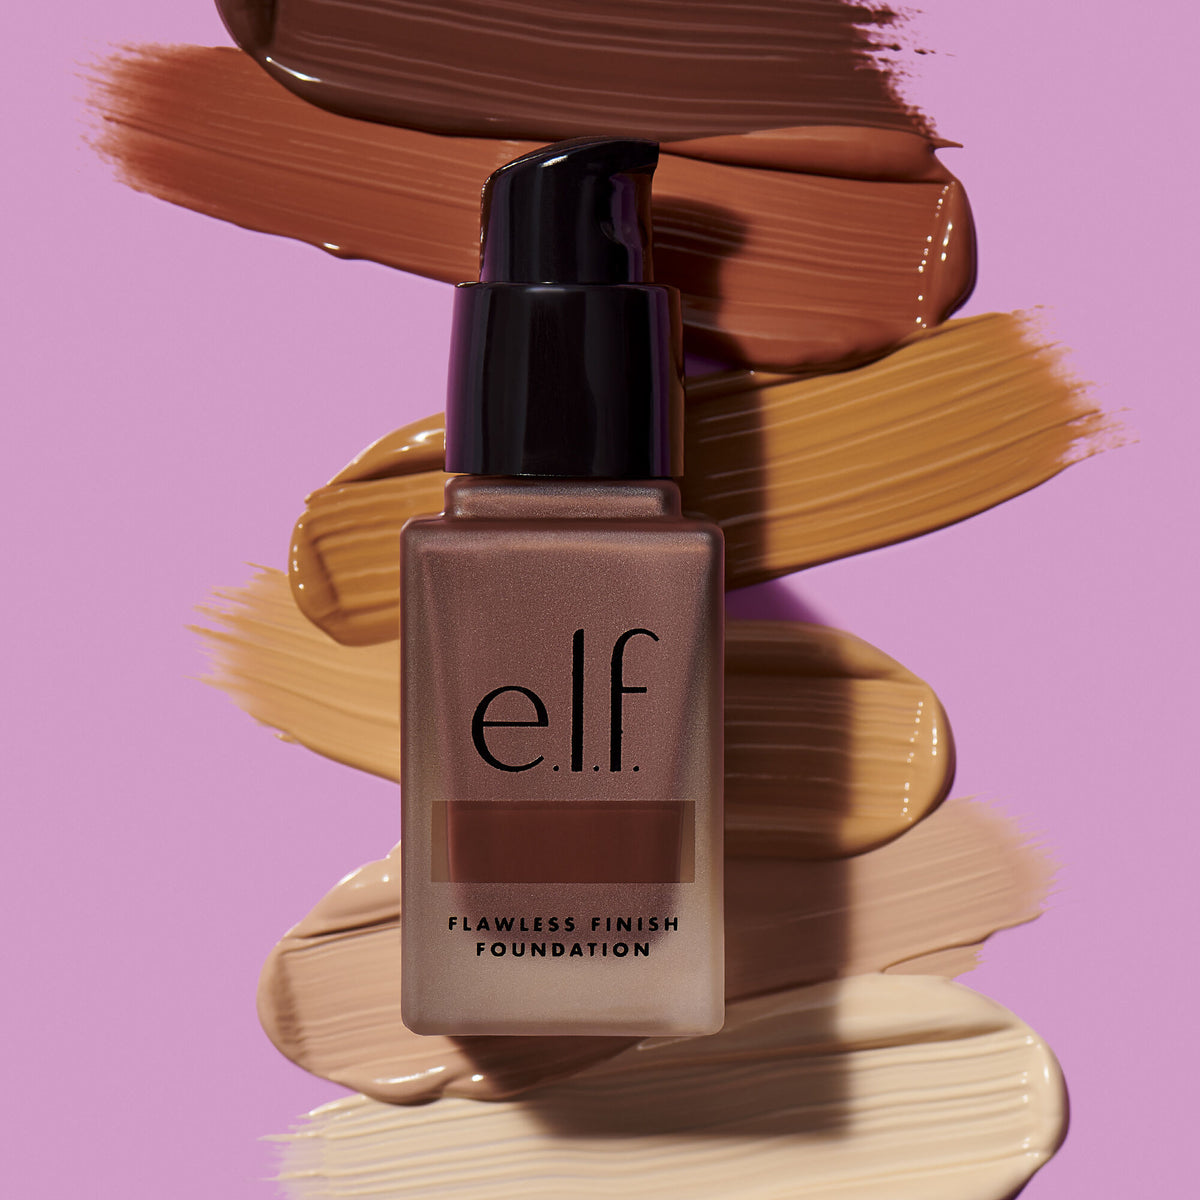 ELF Flawless Finish Foundation with SPF15